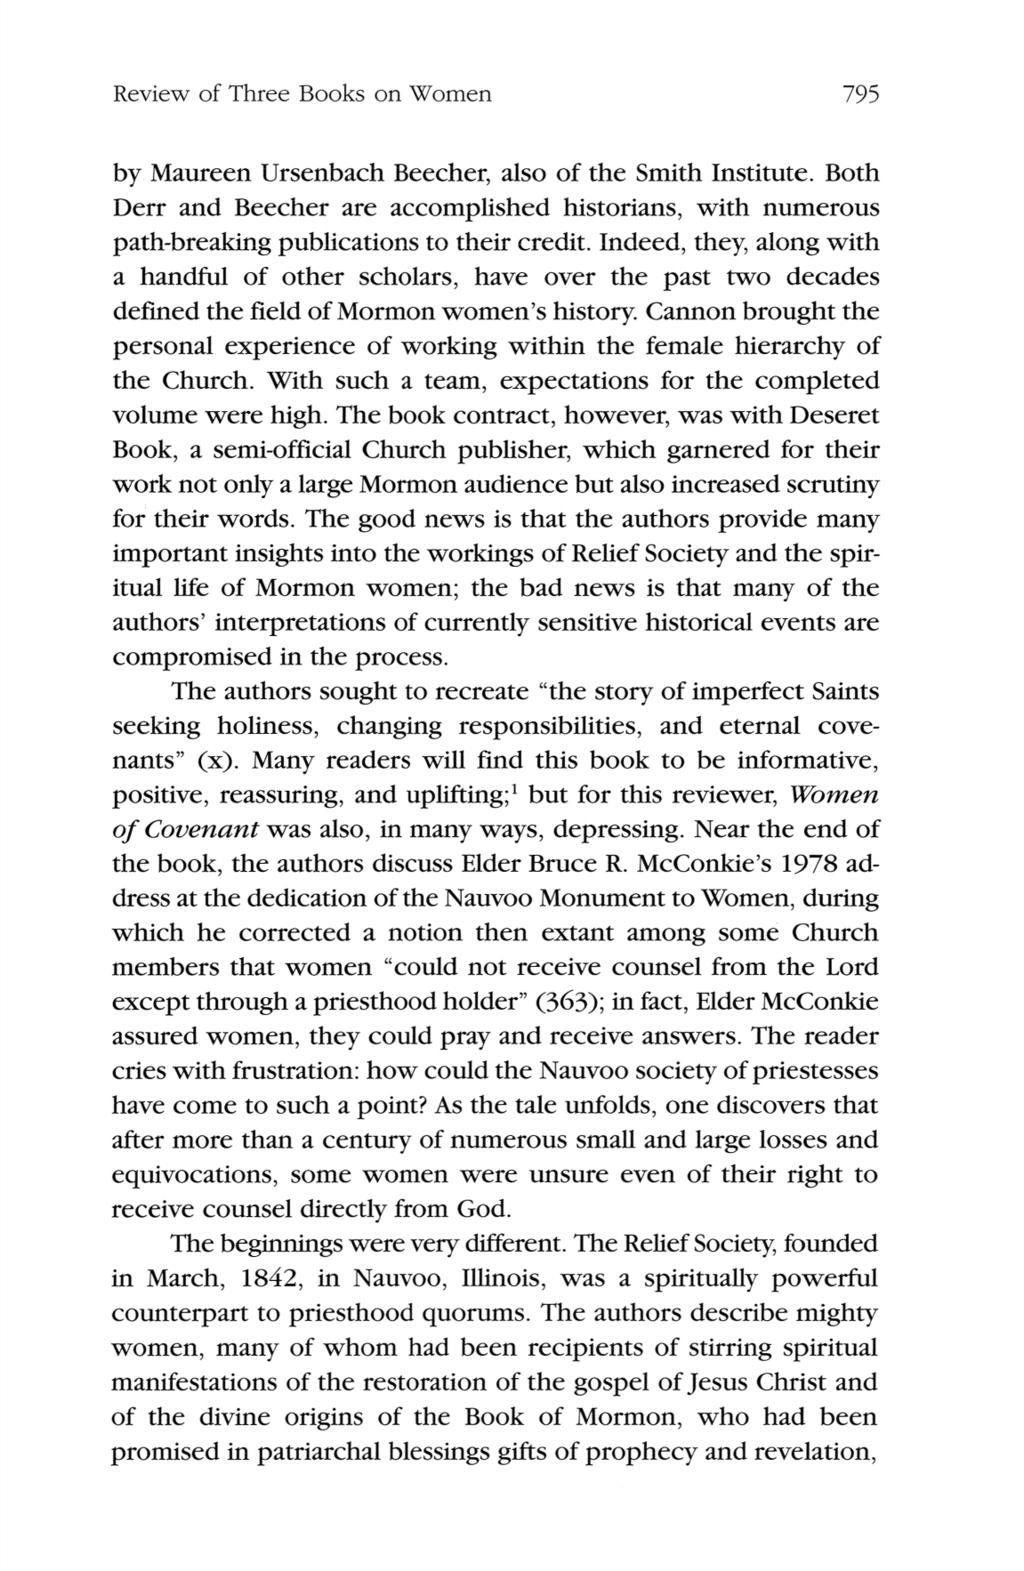 Richards: <em>women of Covenant: The Story of Relief Society</em> by Jill M review of three books on women 795 by maureen ursenbach beecher also of the smith institute both derr and beecher are